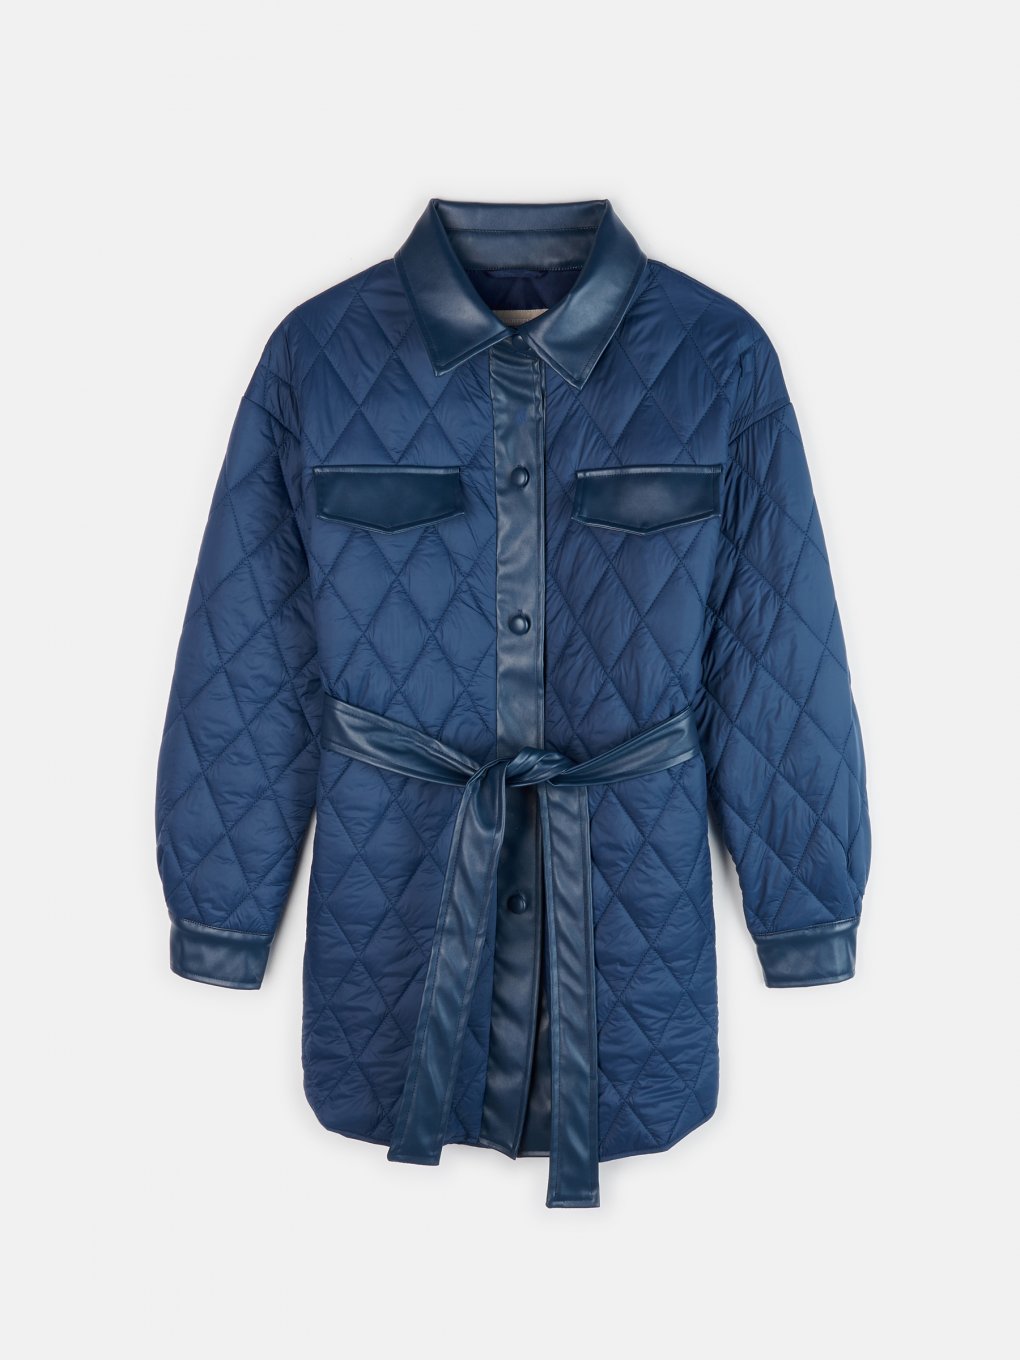 Quilted light jacket